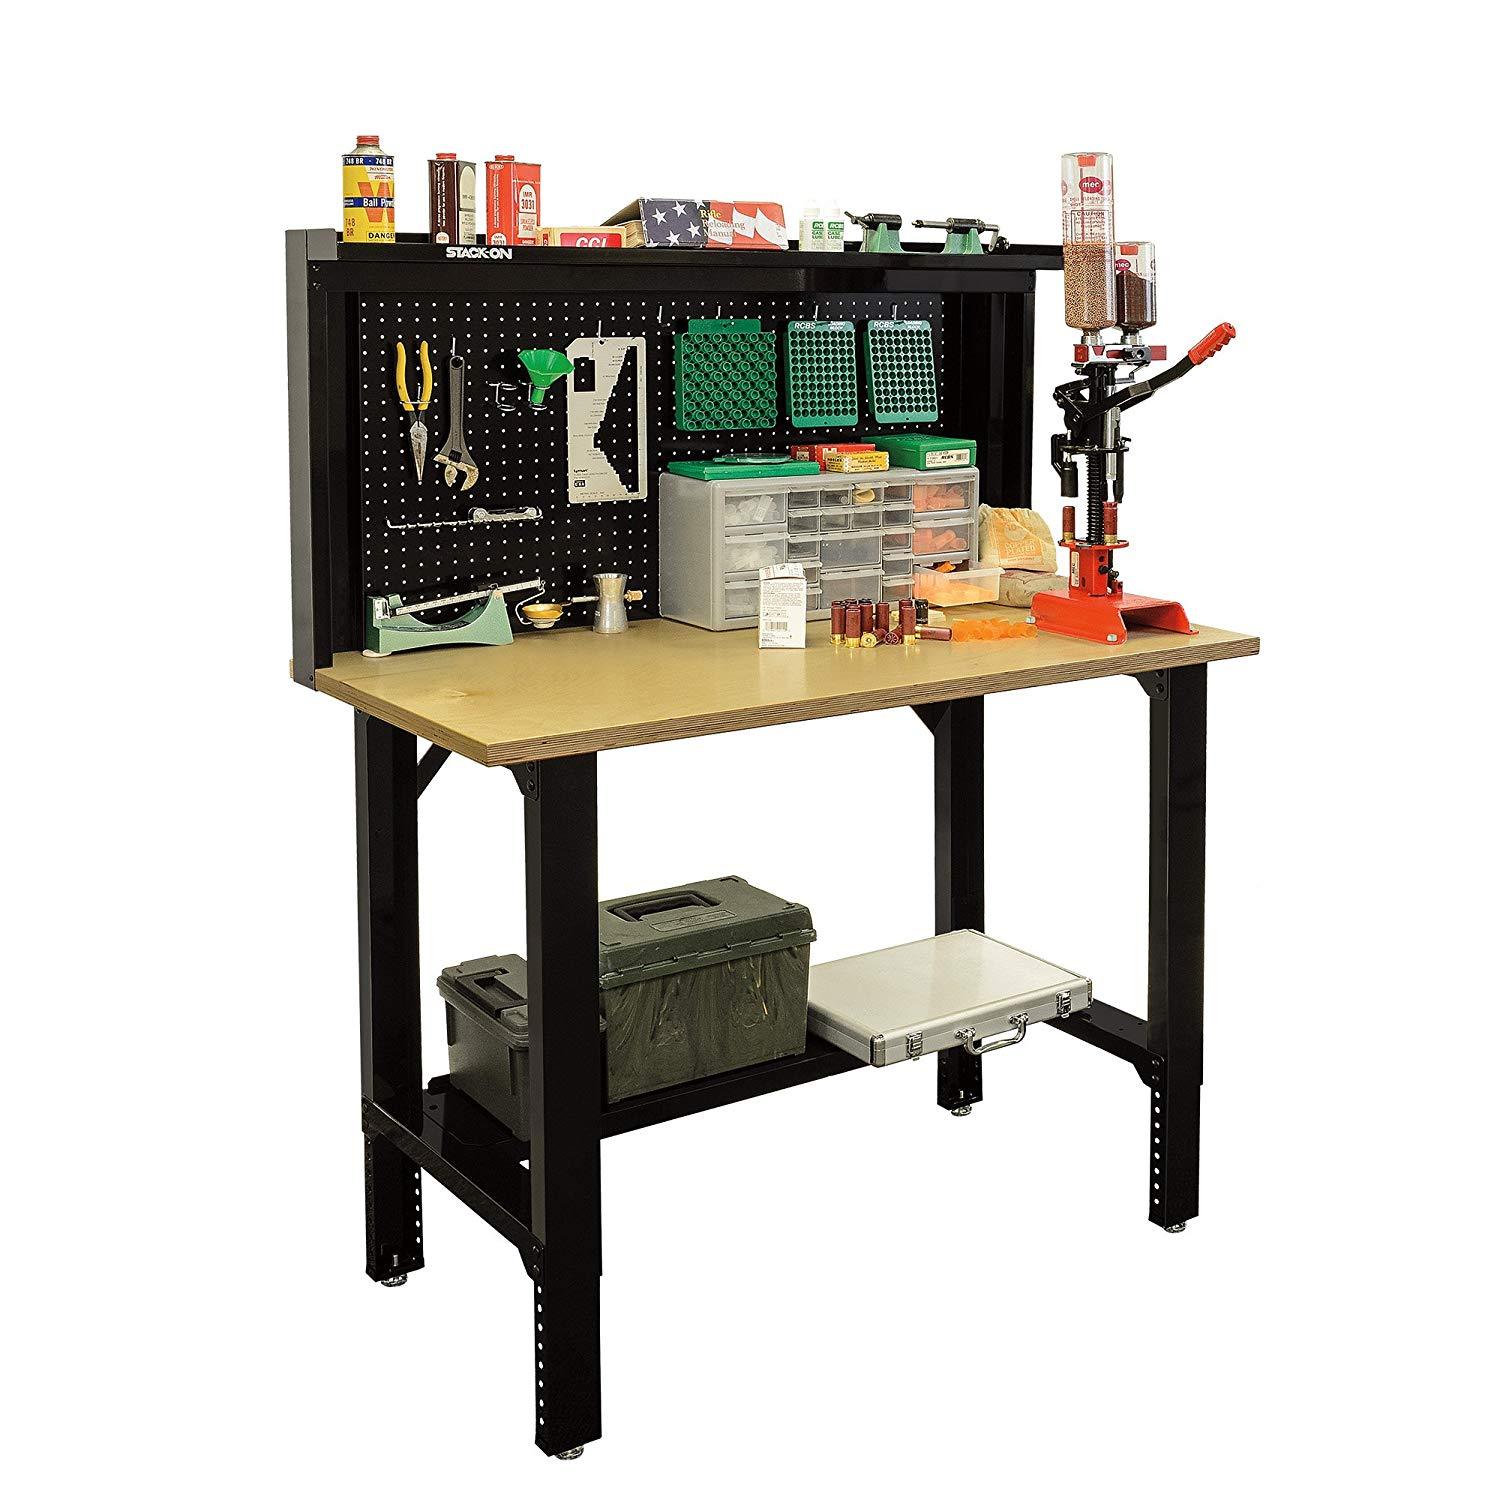 Senior.com Work Benches & Tables For Garage Organization and Storage